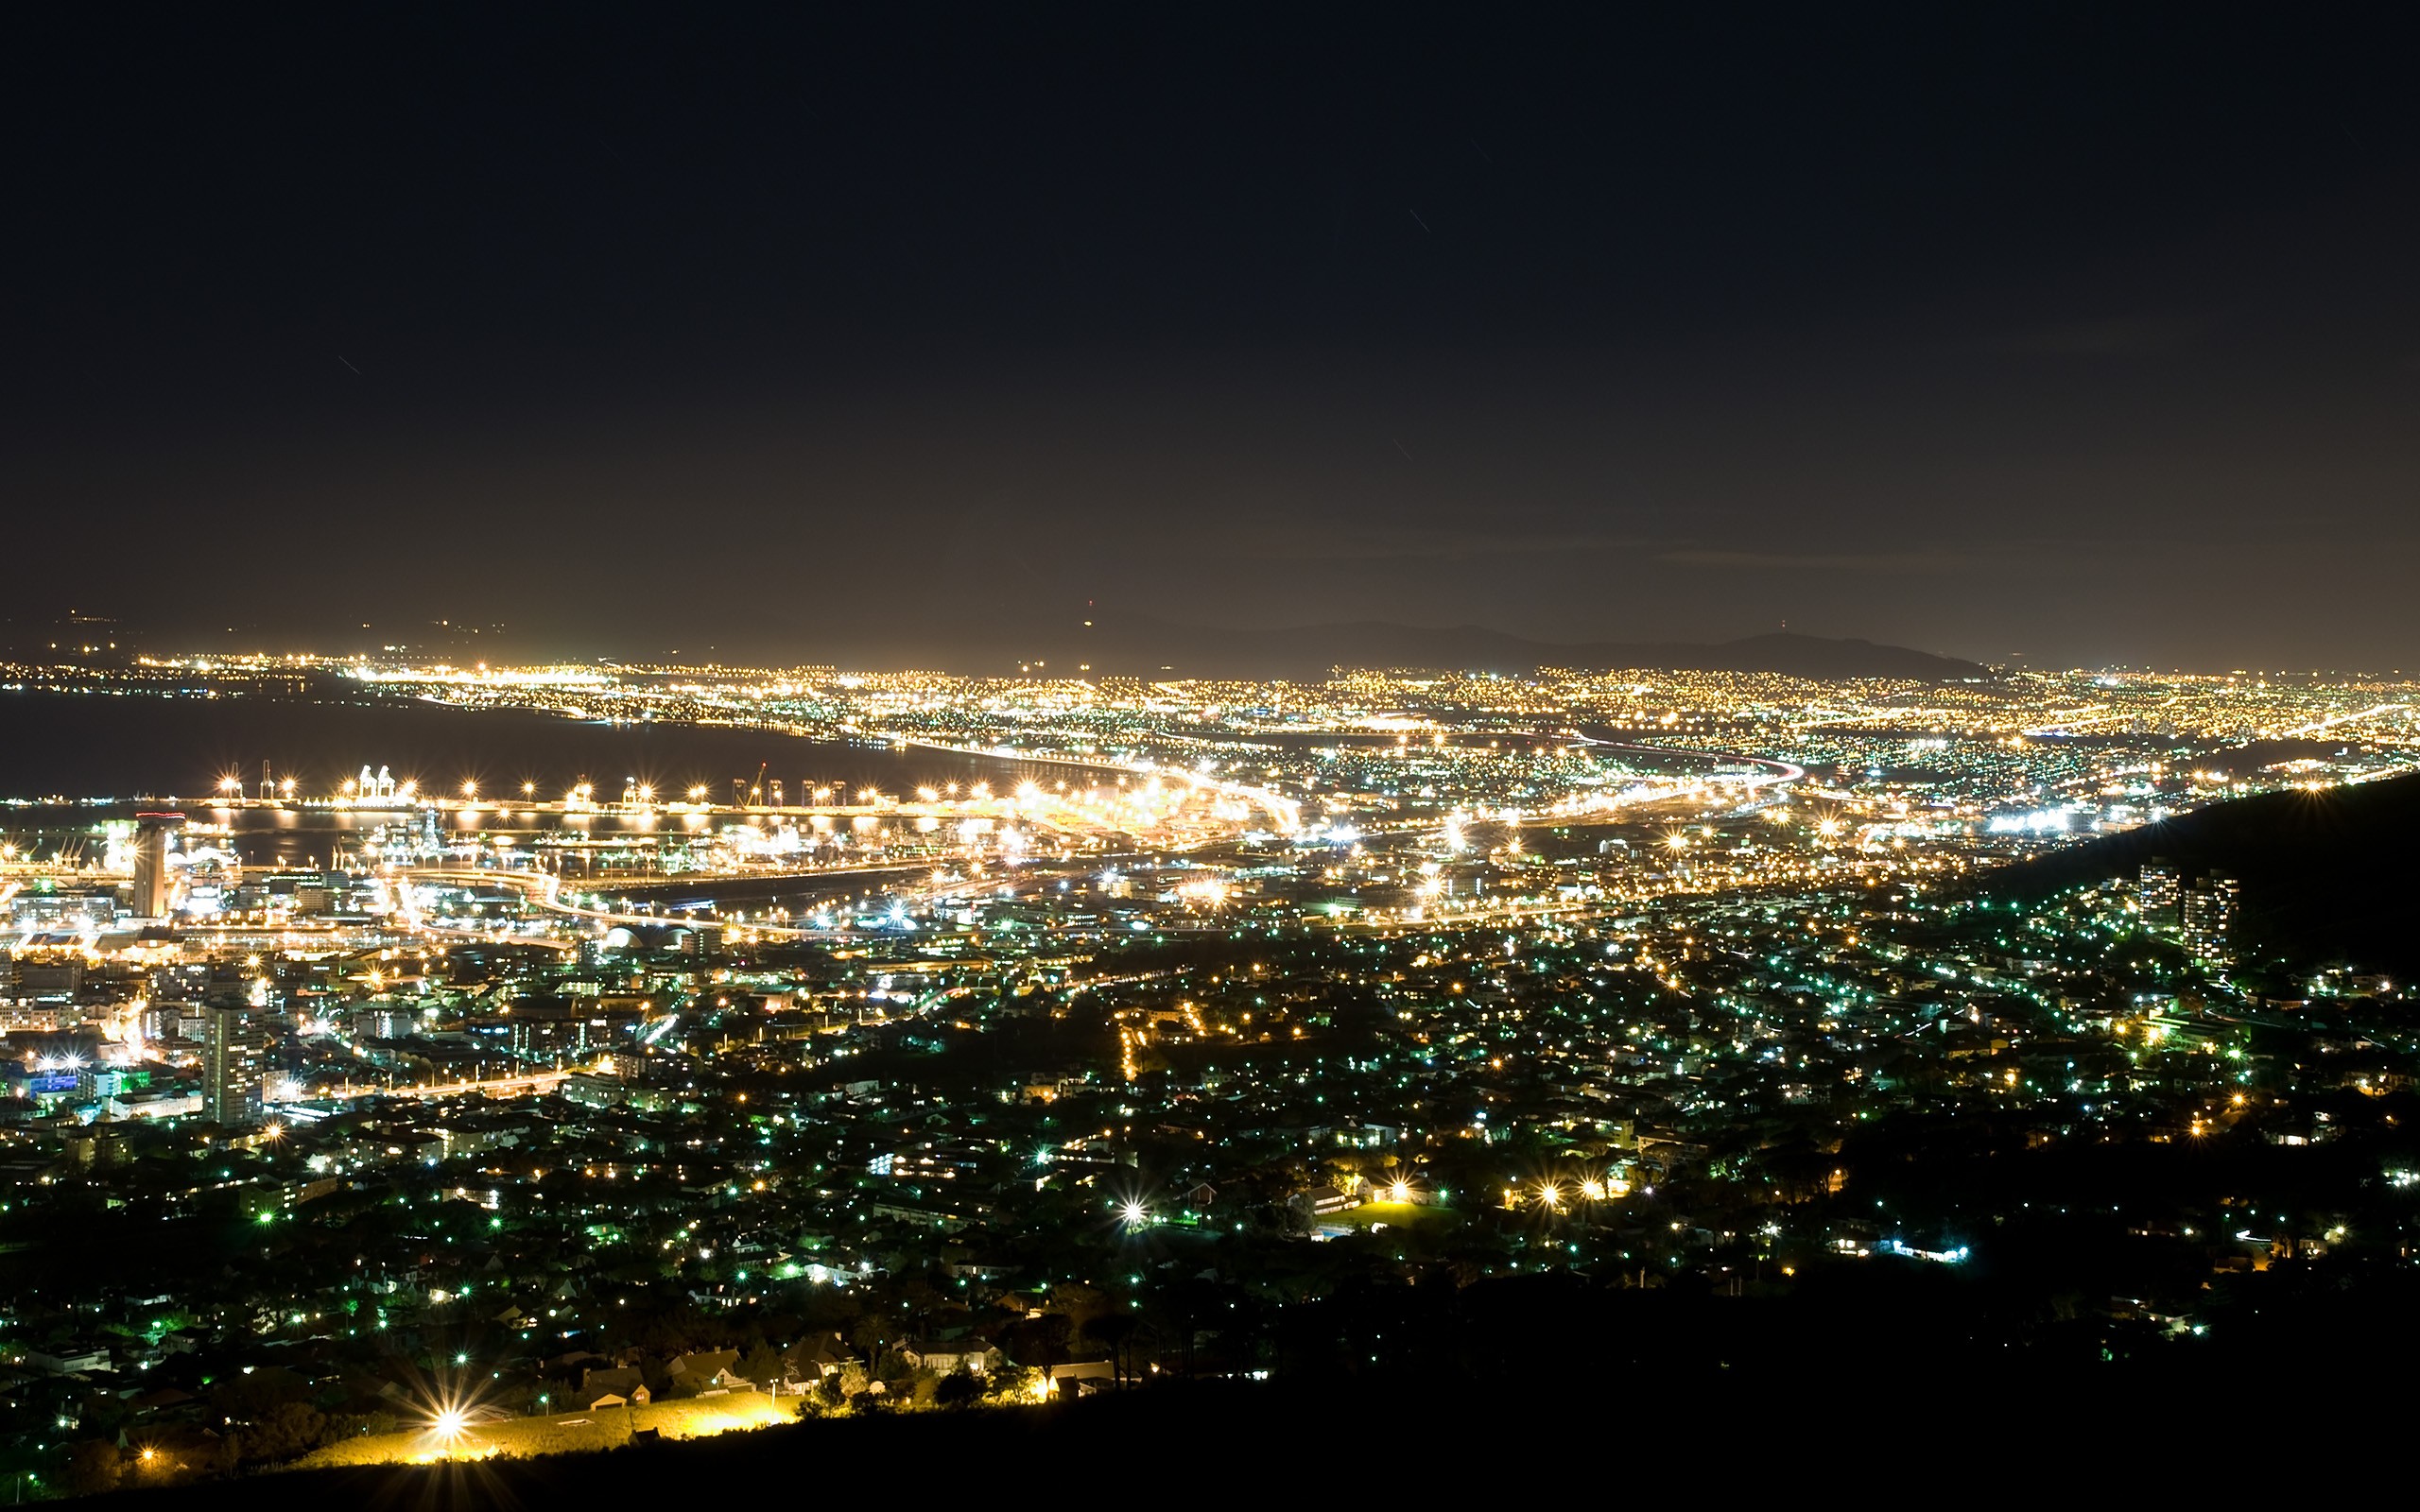 photography, Cityscape, Night, Lights, City, Cape Town, South Africa, Water, Sea, Urban Wallpaper